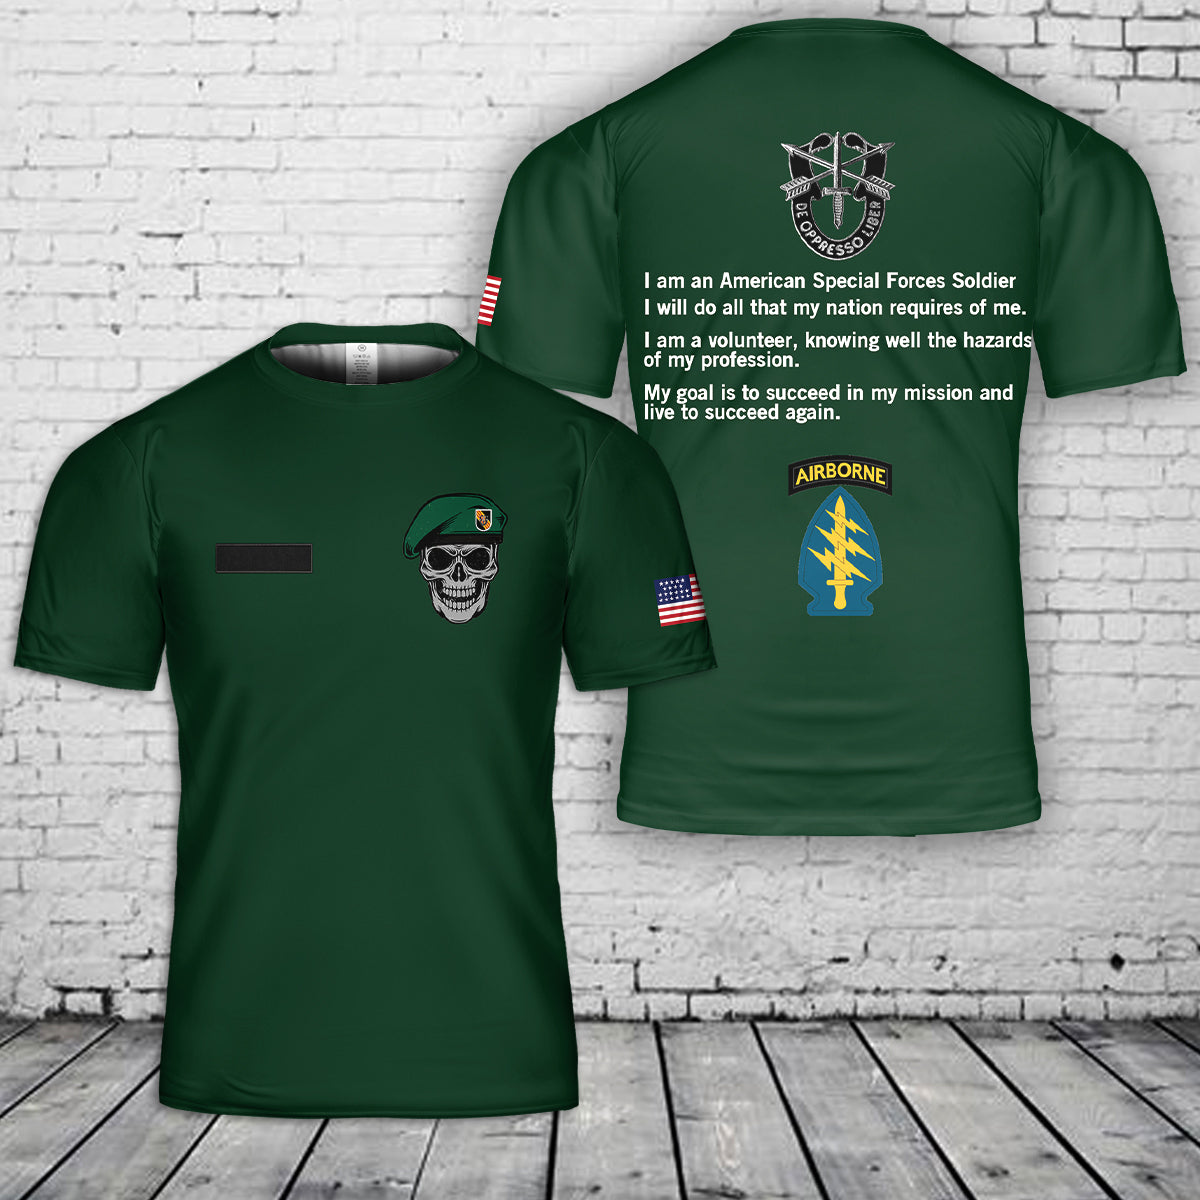 Custom Name US Army 5th SFG(A) Special Forces Group Green Berets T-Shi ...